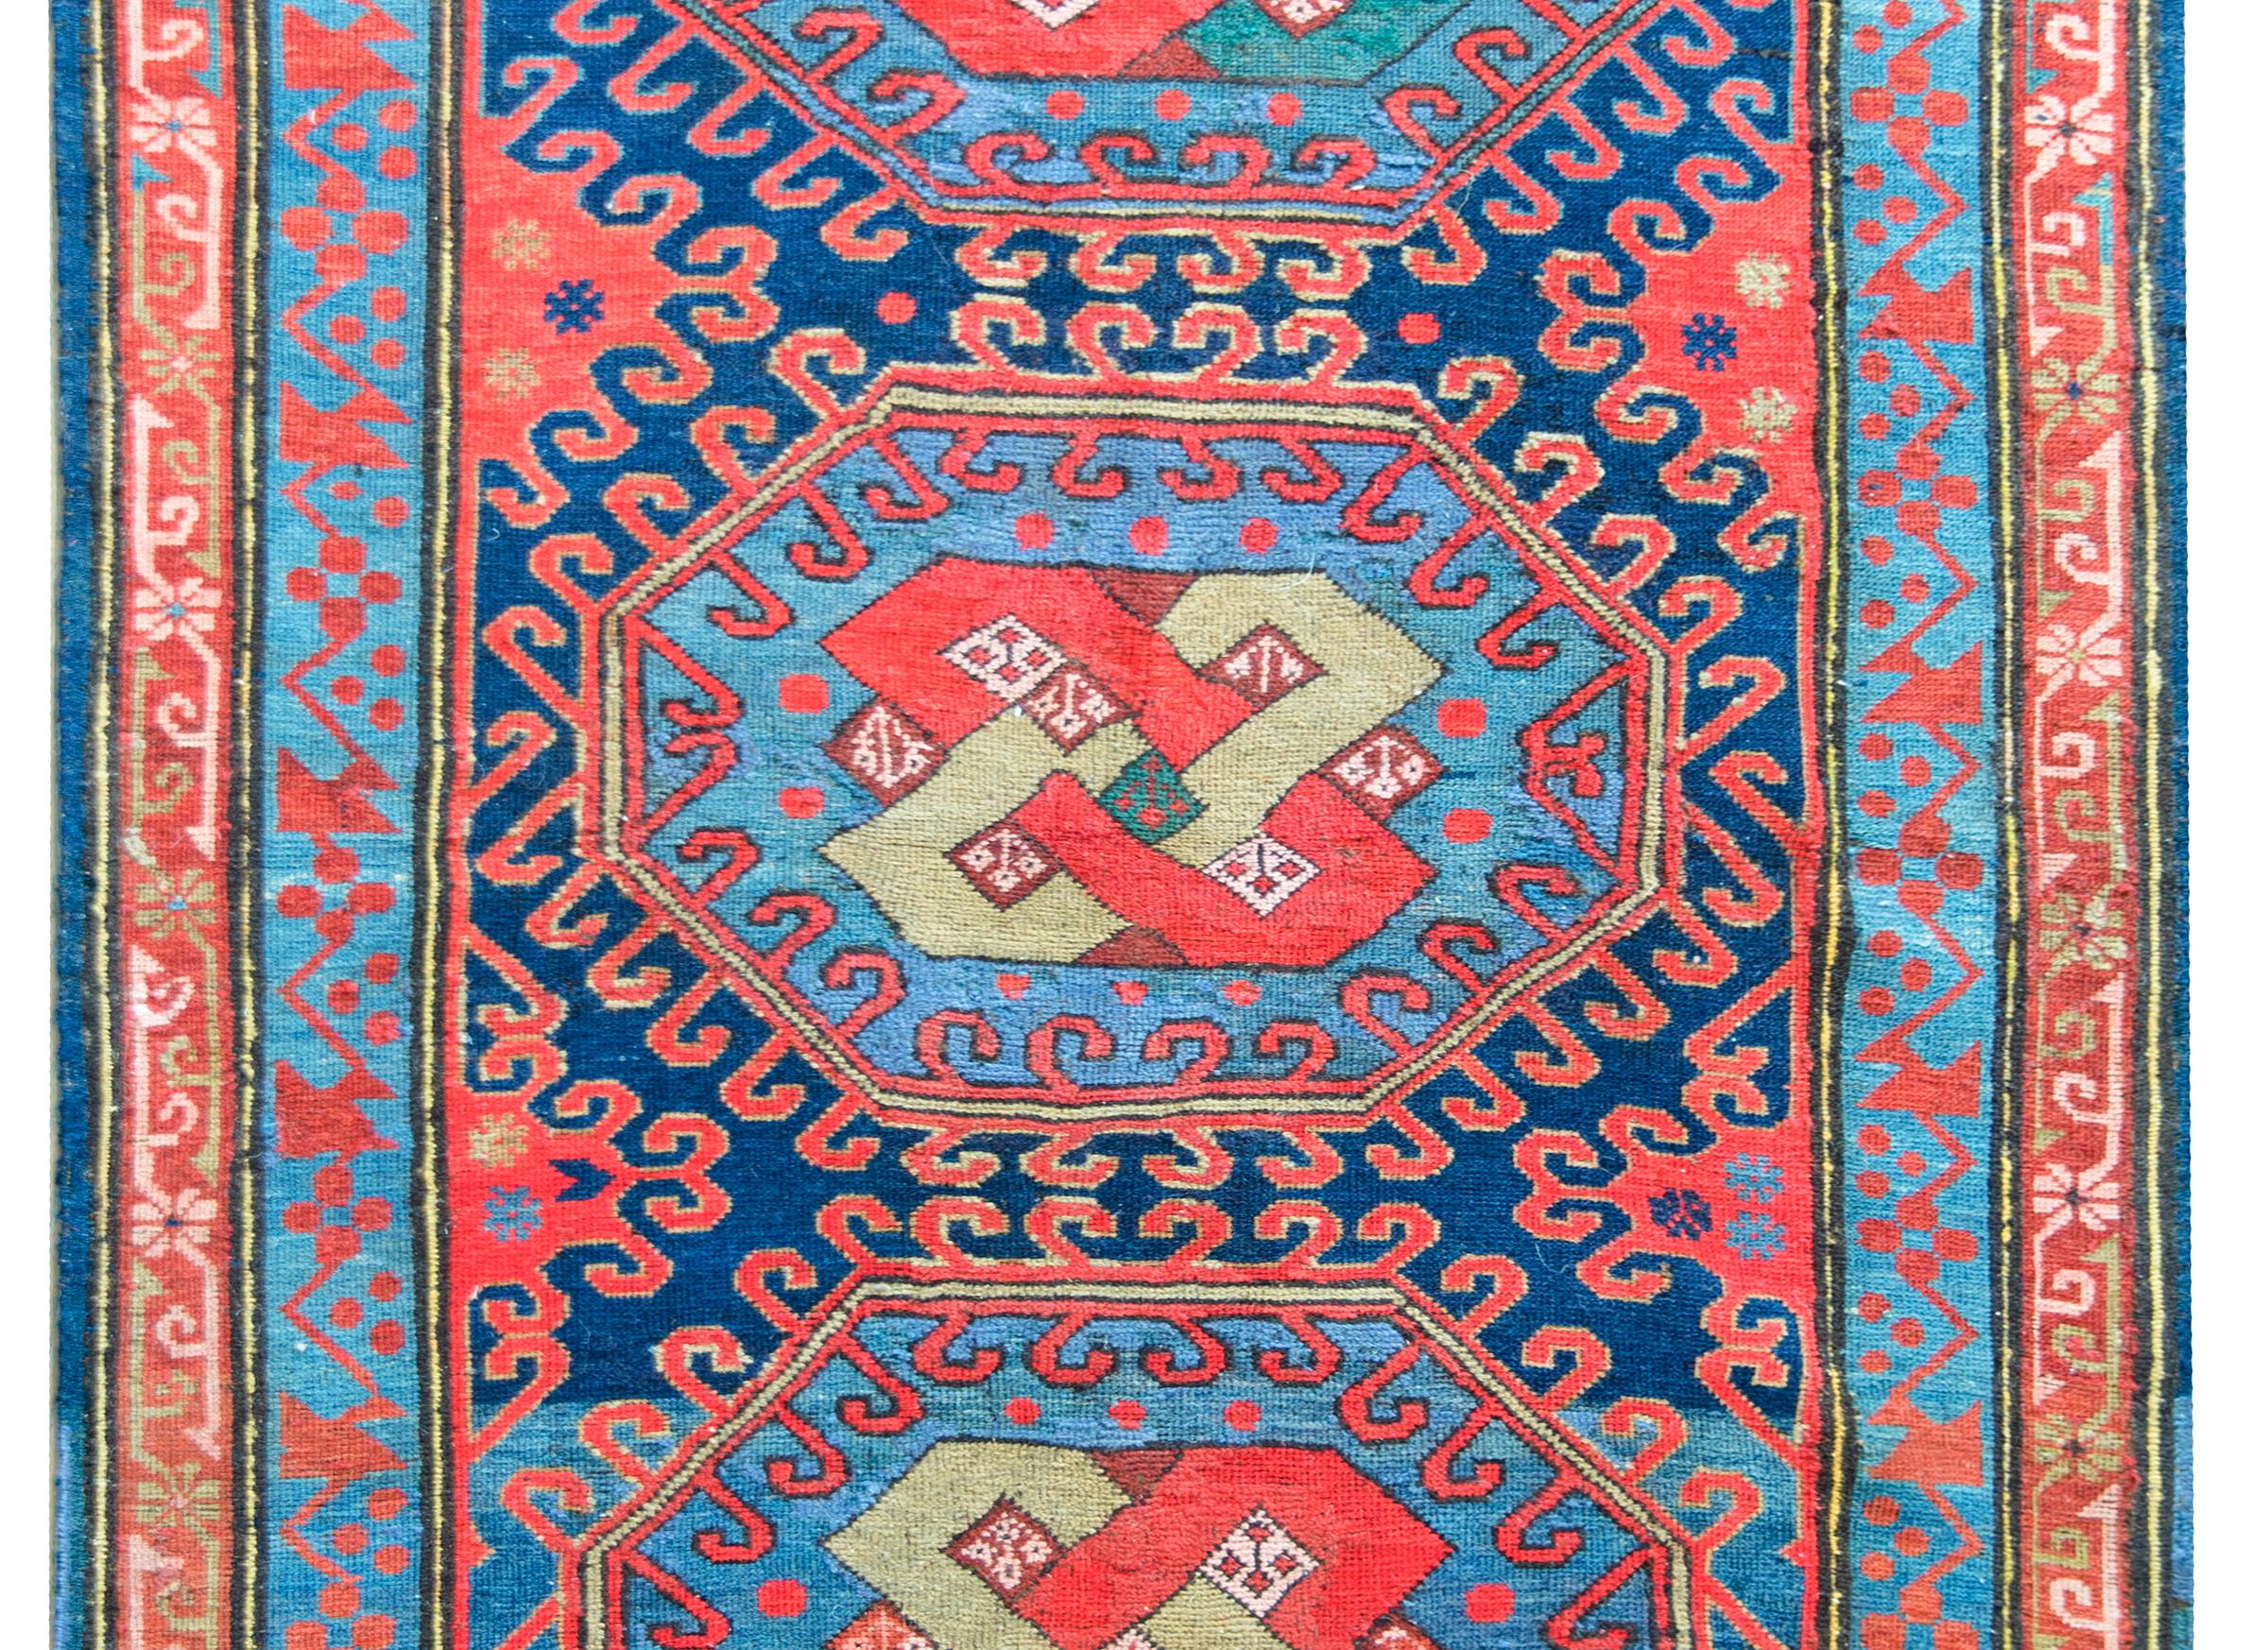 An incredible early 20th century Persian Kazak rug with three central medallions each with an endless knot pattern surrounded by stylized floral patterns, and all surrounded by a complex border with two floral patterned stripes, and all woven in